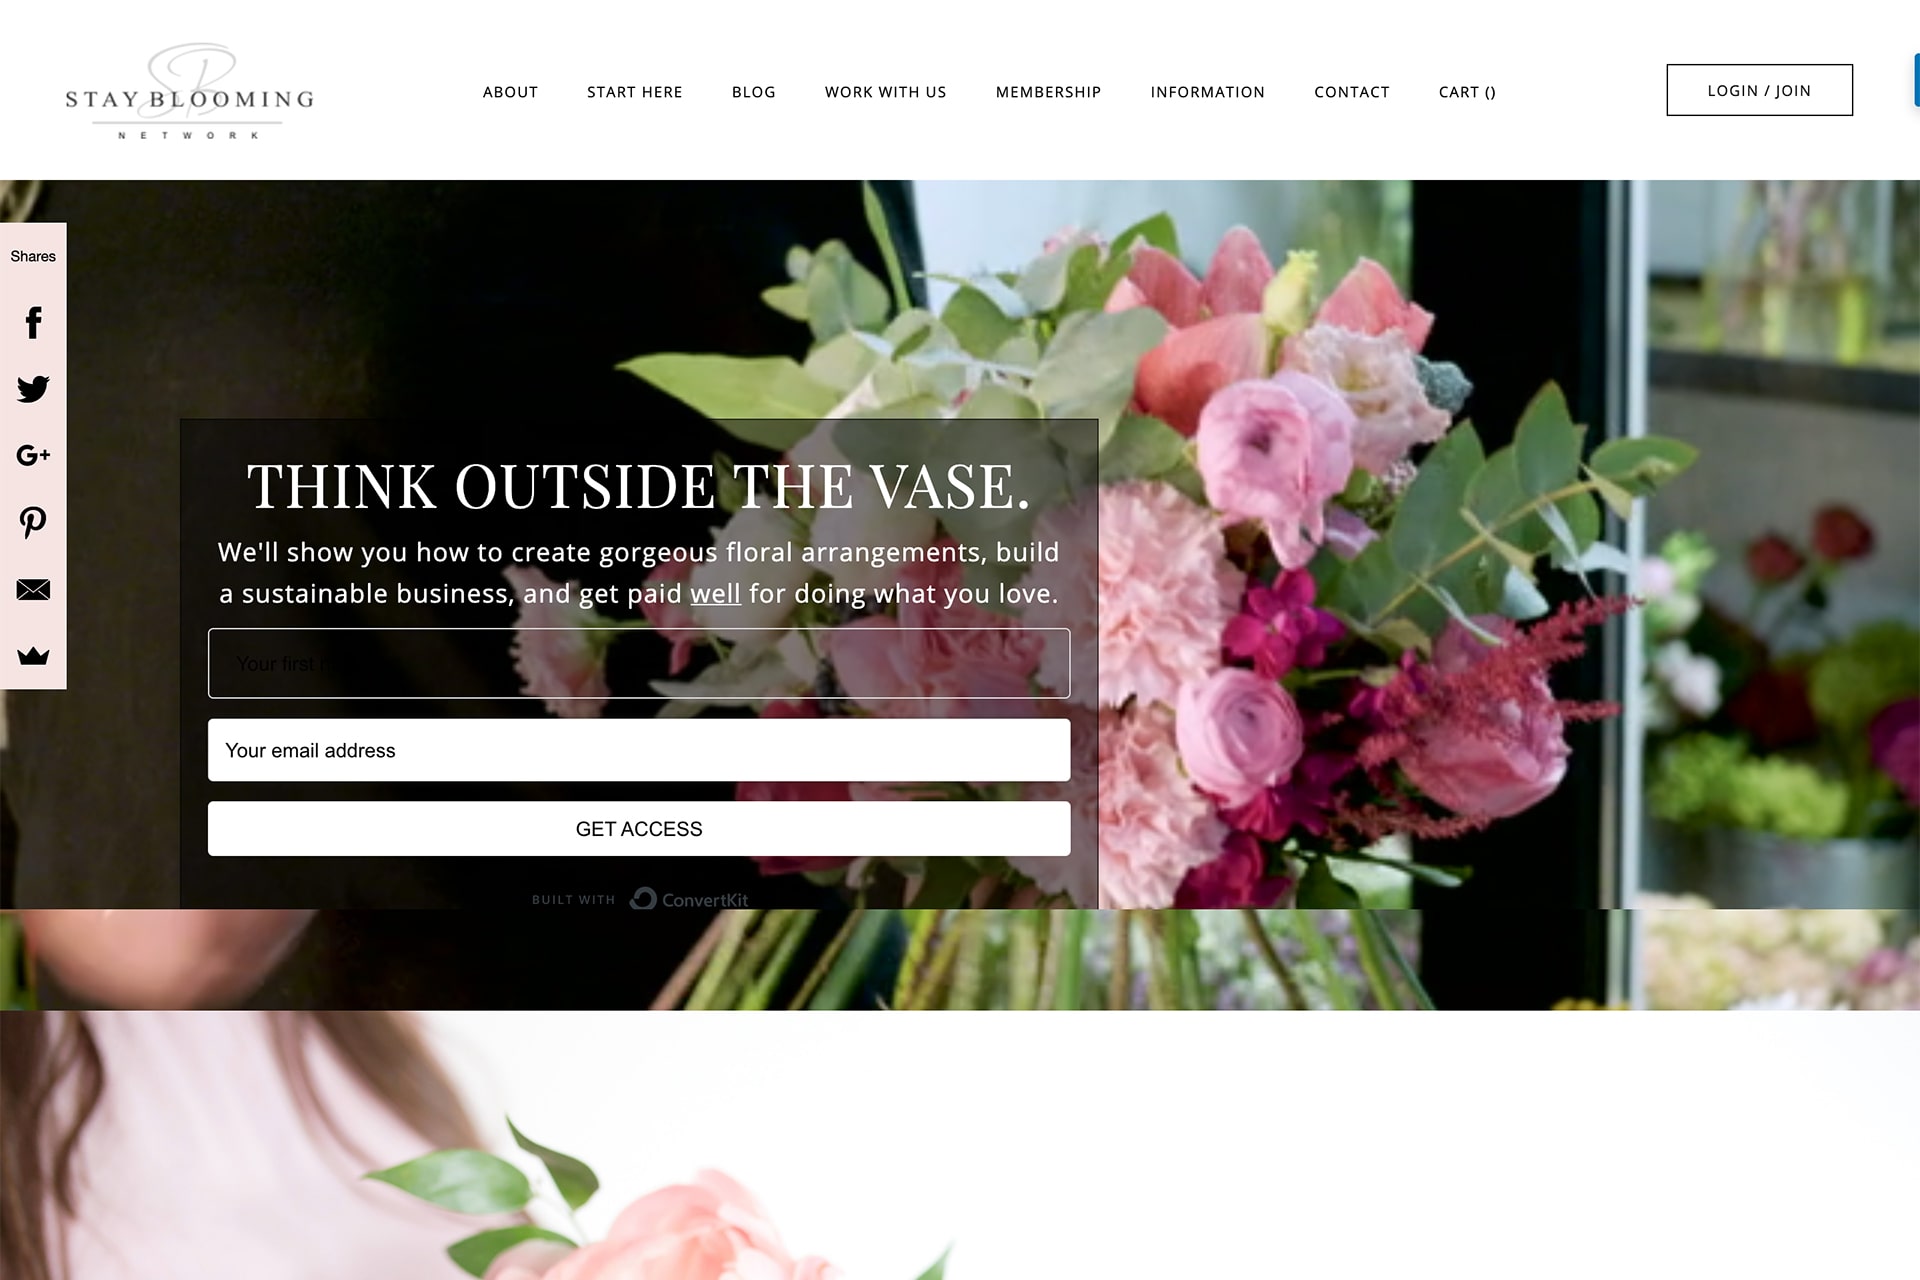 Weebly website example 6 - Stay Blooming Flower